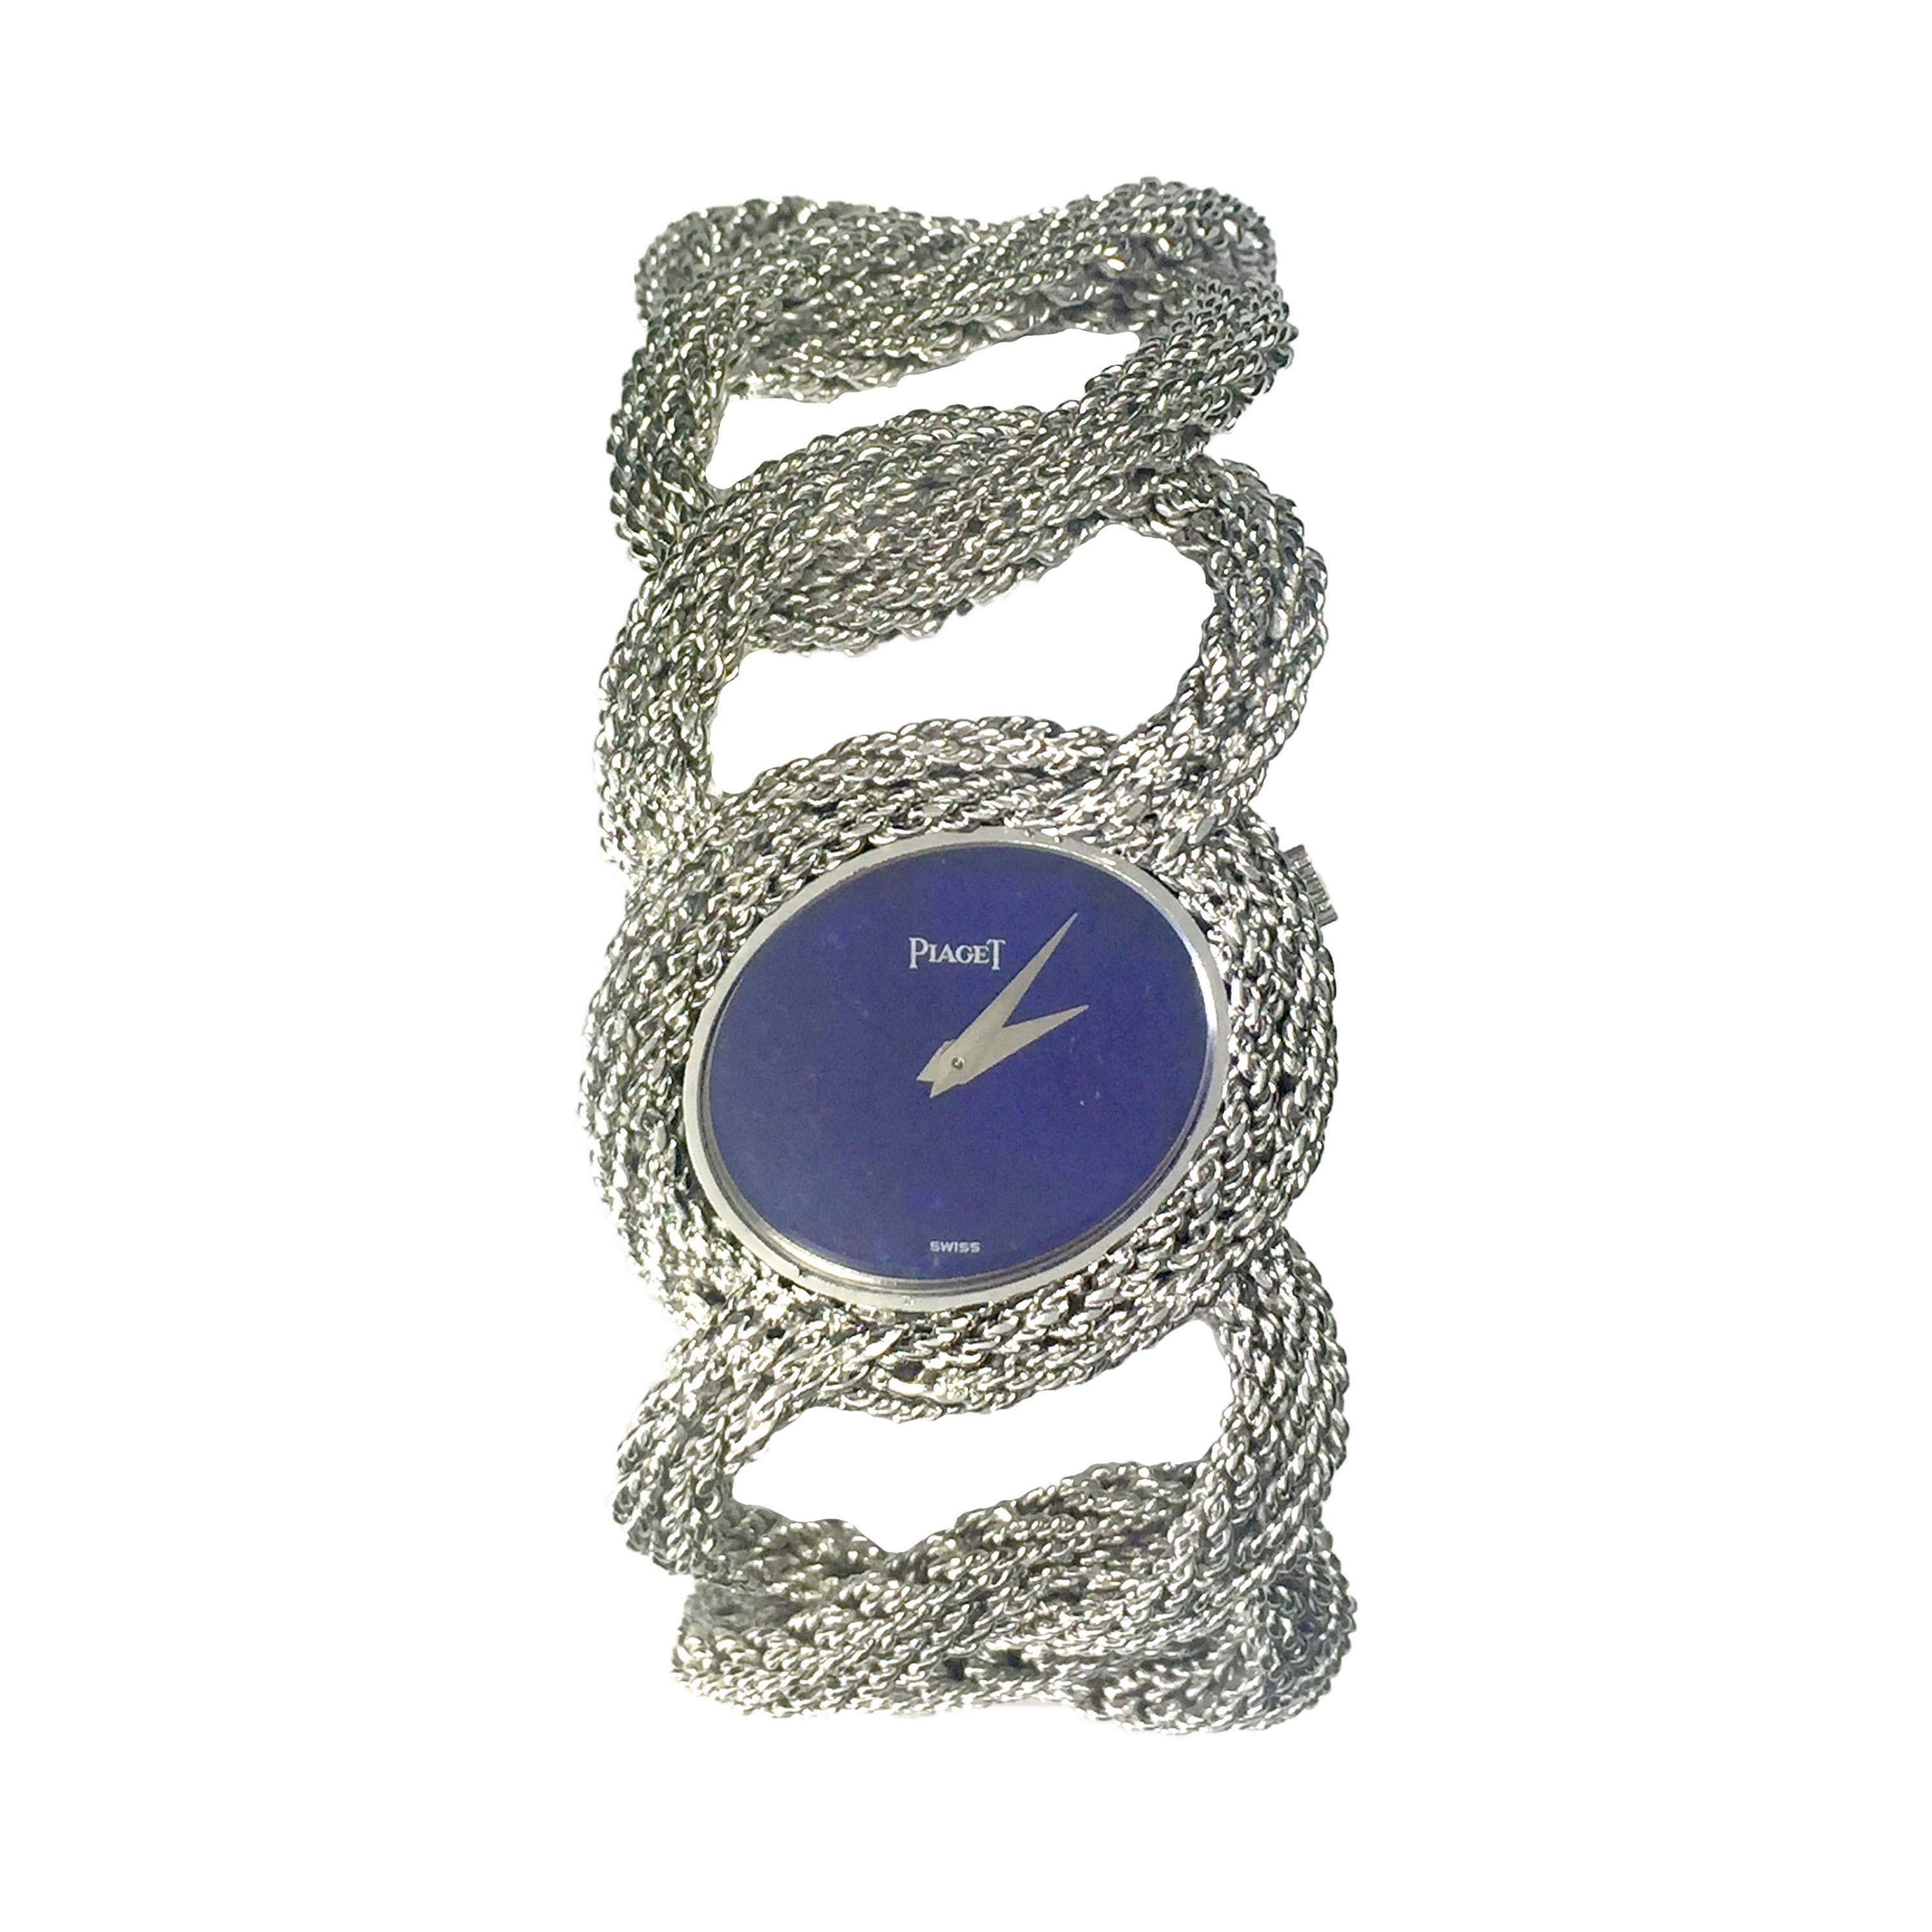 Piaget White Gold Lapis Dial Large and Impressive Mechanical Bracelet Watch